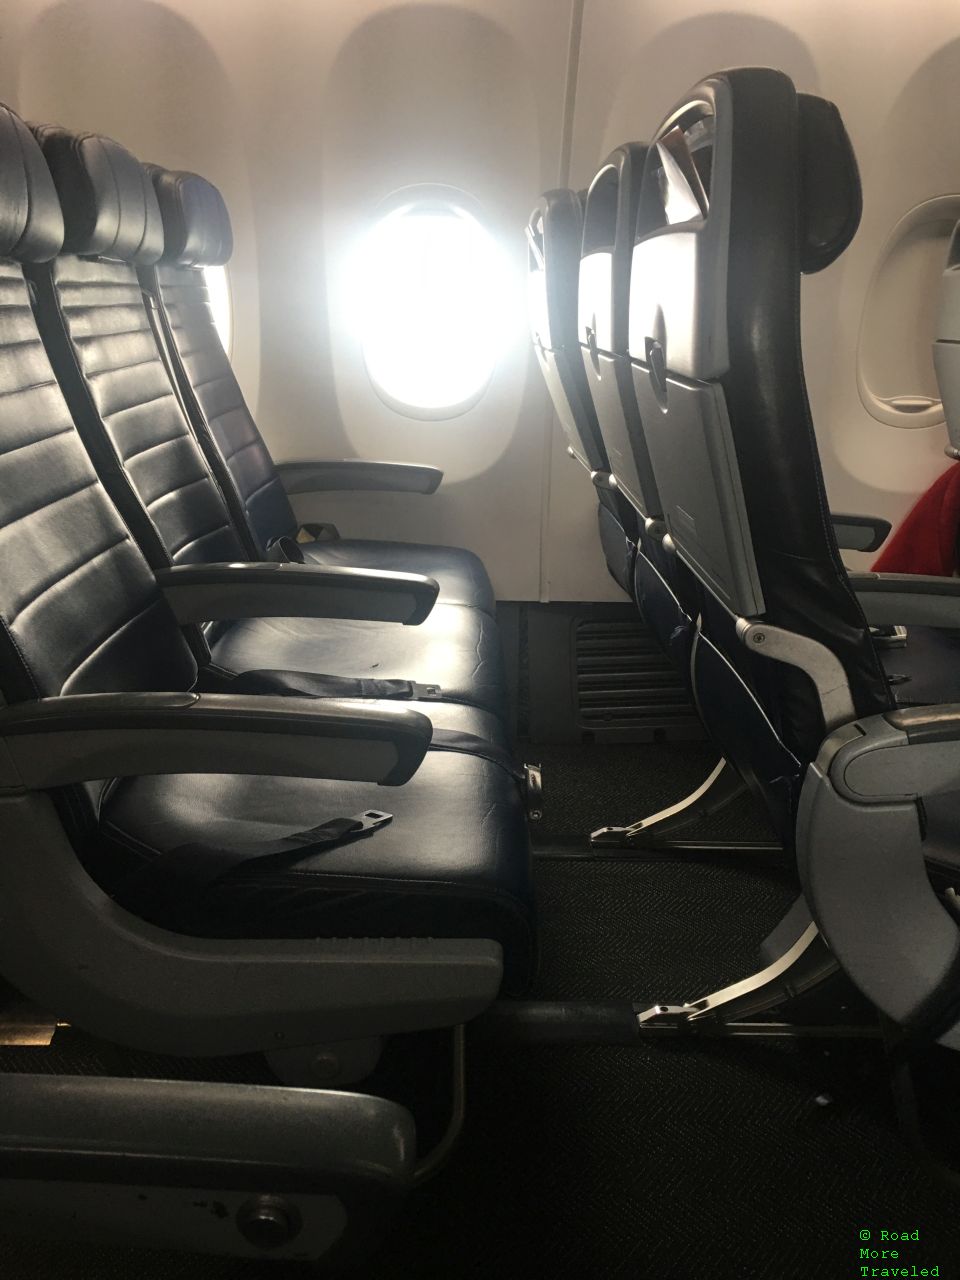 United Airlines Economy Class Review - 737-900 seating